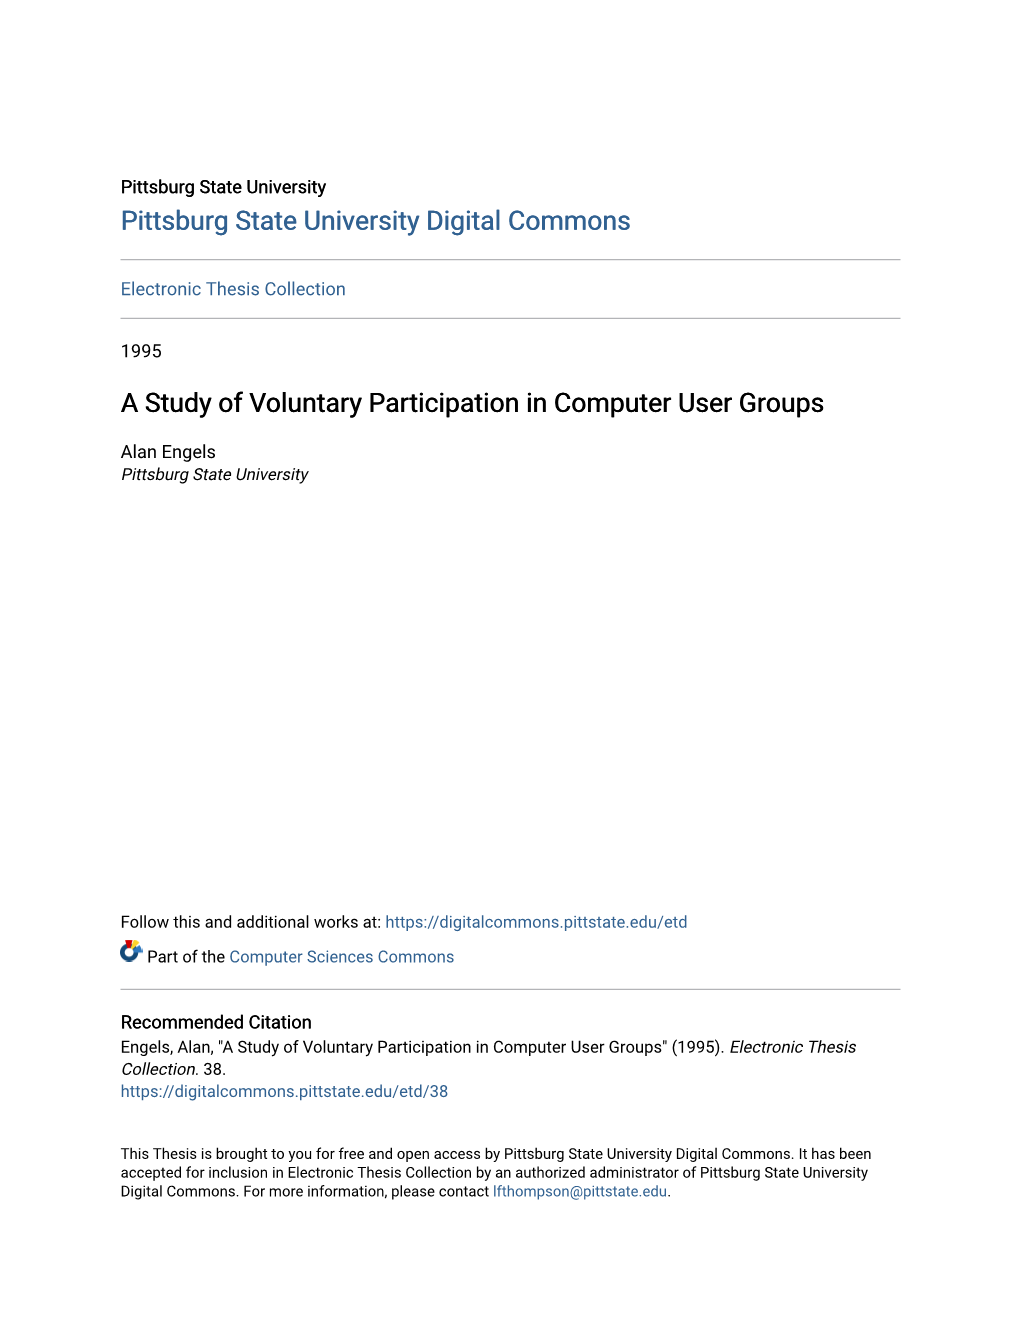 A Study of Voluntary Participation in Computer User Groups